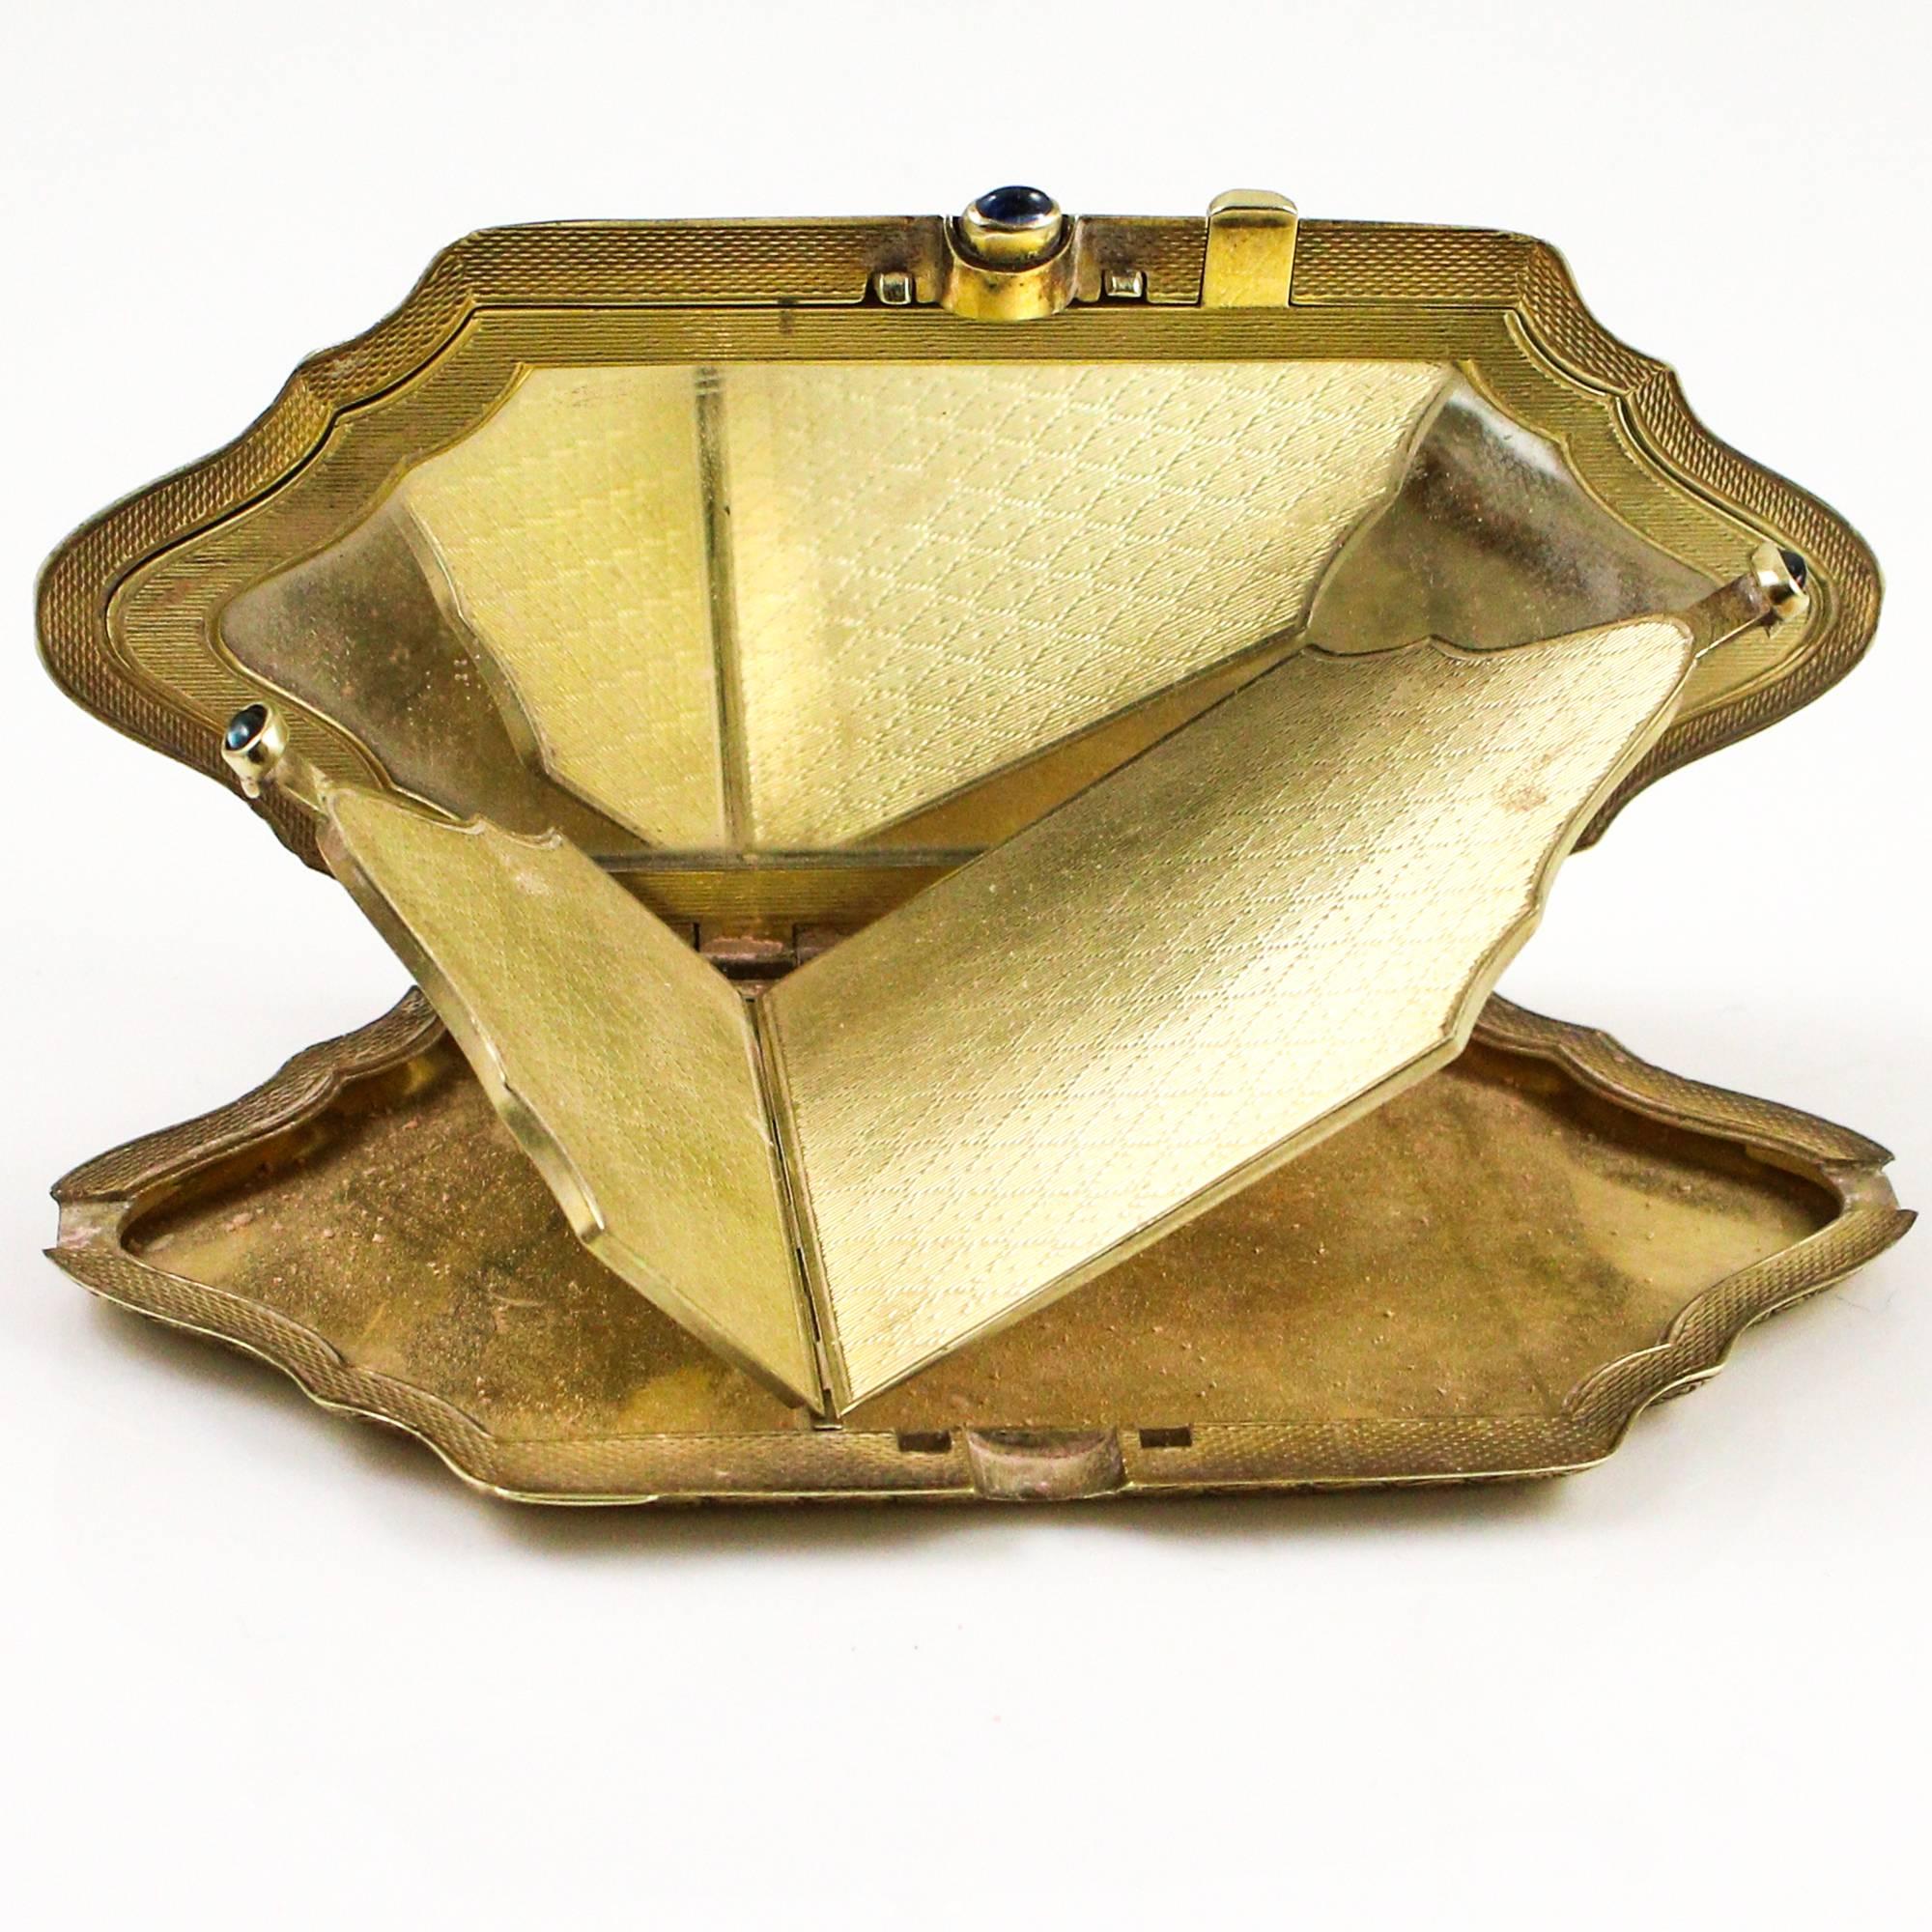 Exquisite Gold Engraved Compact With Sapphire Accents 1